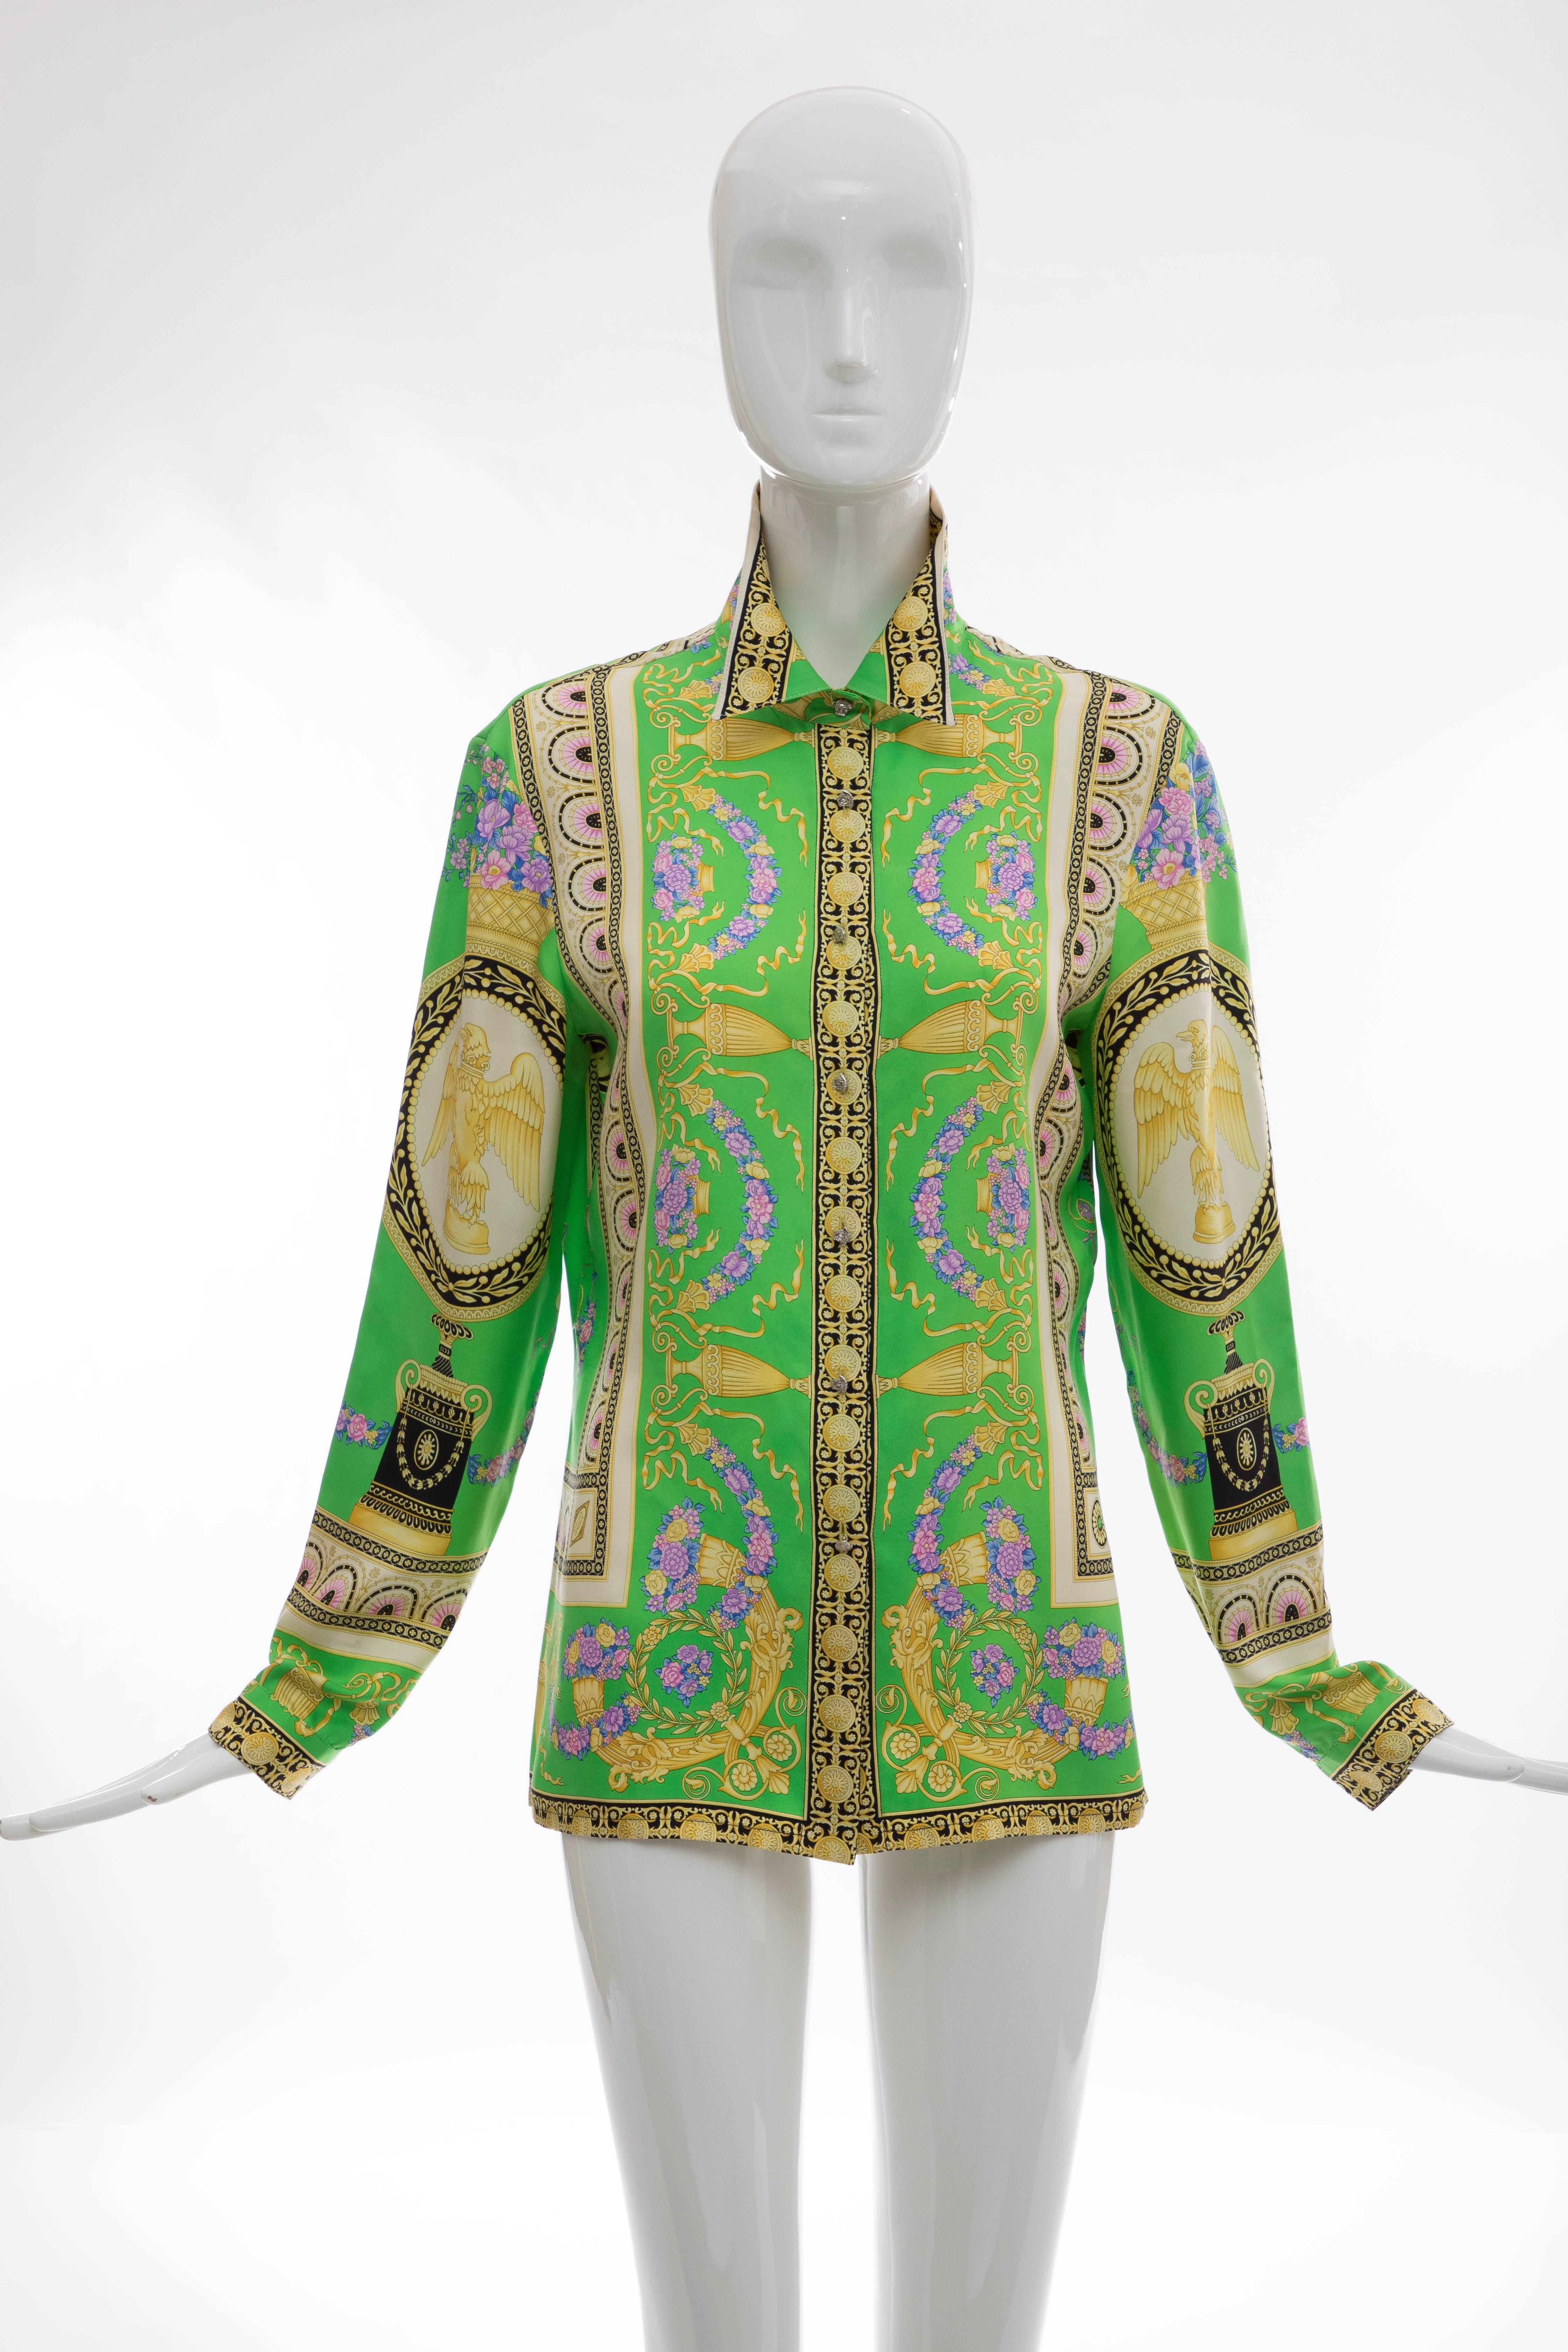 Gianni Versace Couture, Circa 1990's silk blouse featuring print throughout, pointed collar, long sleeves and silver-tone medusa head button closures at front.

IT. 44
US. 8

Bust: 38, Waist 36, Length 29
